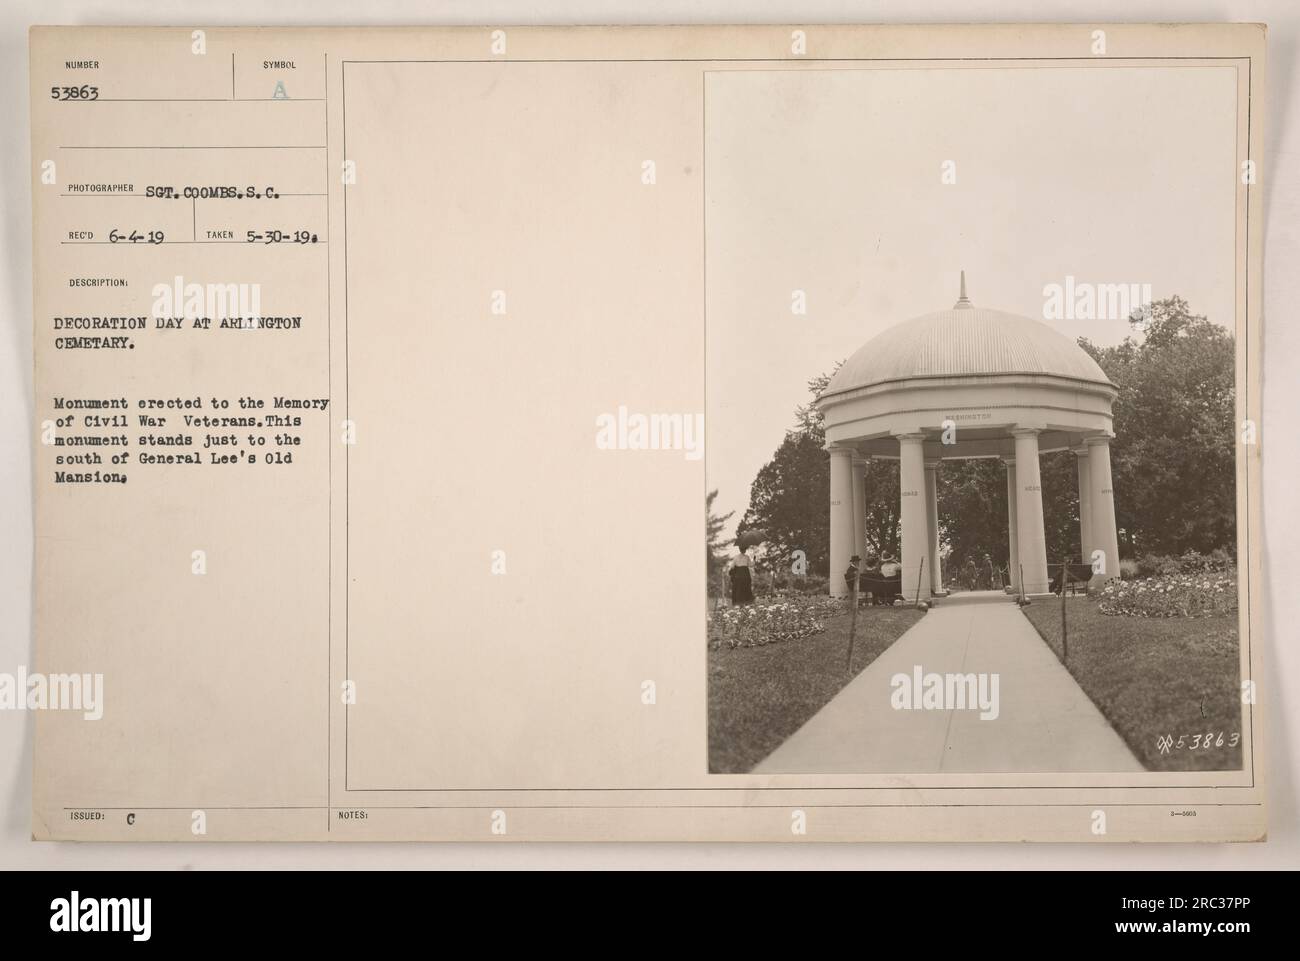 Caption: 'Decoration Day at Arlington Cemetery. A monument erected to honor the memory of Civil War veterans. Positioned south of General Lee's former mansion, this monument holds historical significance at Arlington Cemetery. Date: 6-4-19. Photographer: Sot. Coombs. Description: Symbol captures the essence of Decoration Day. Issued: C. Notes: 53863.' Stock Photo